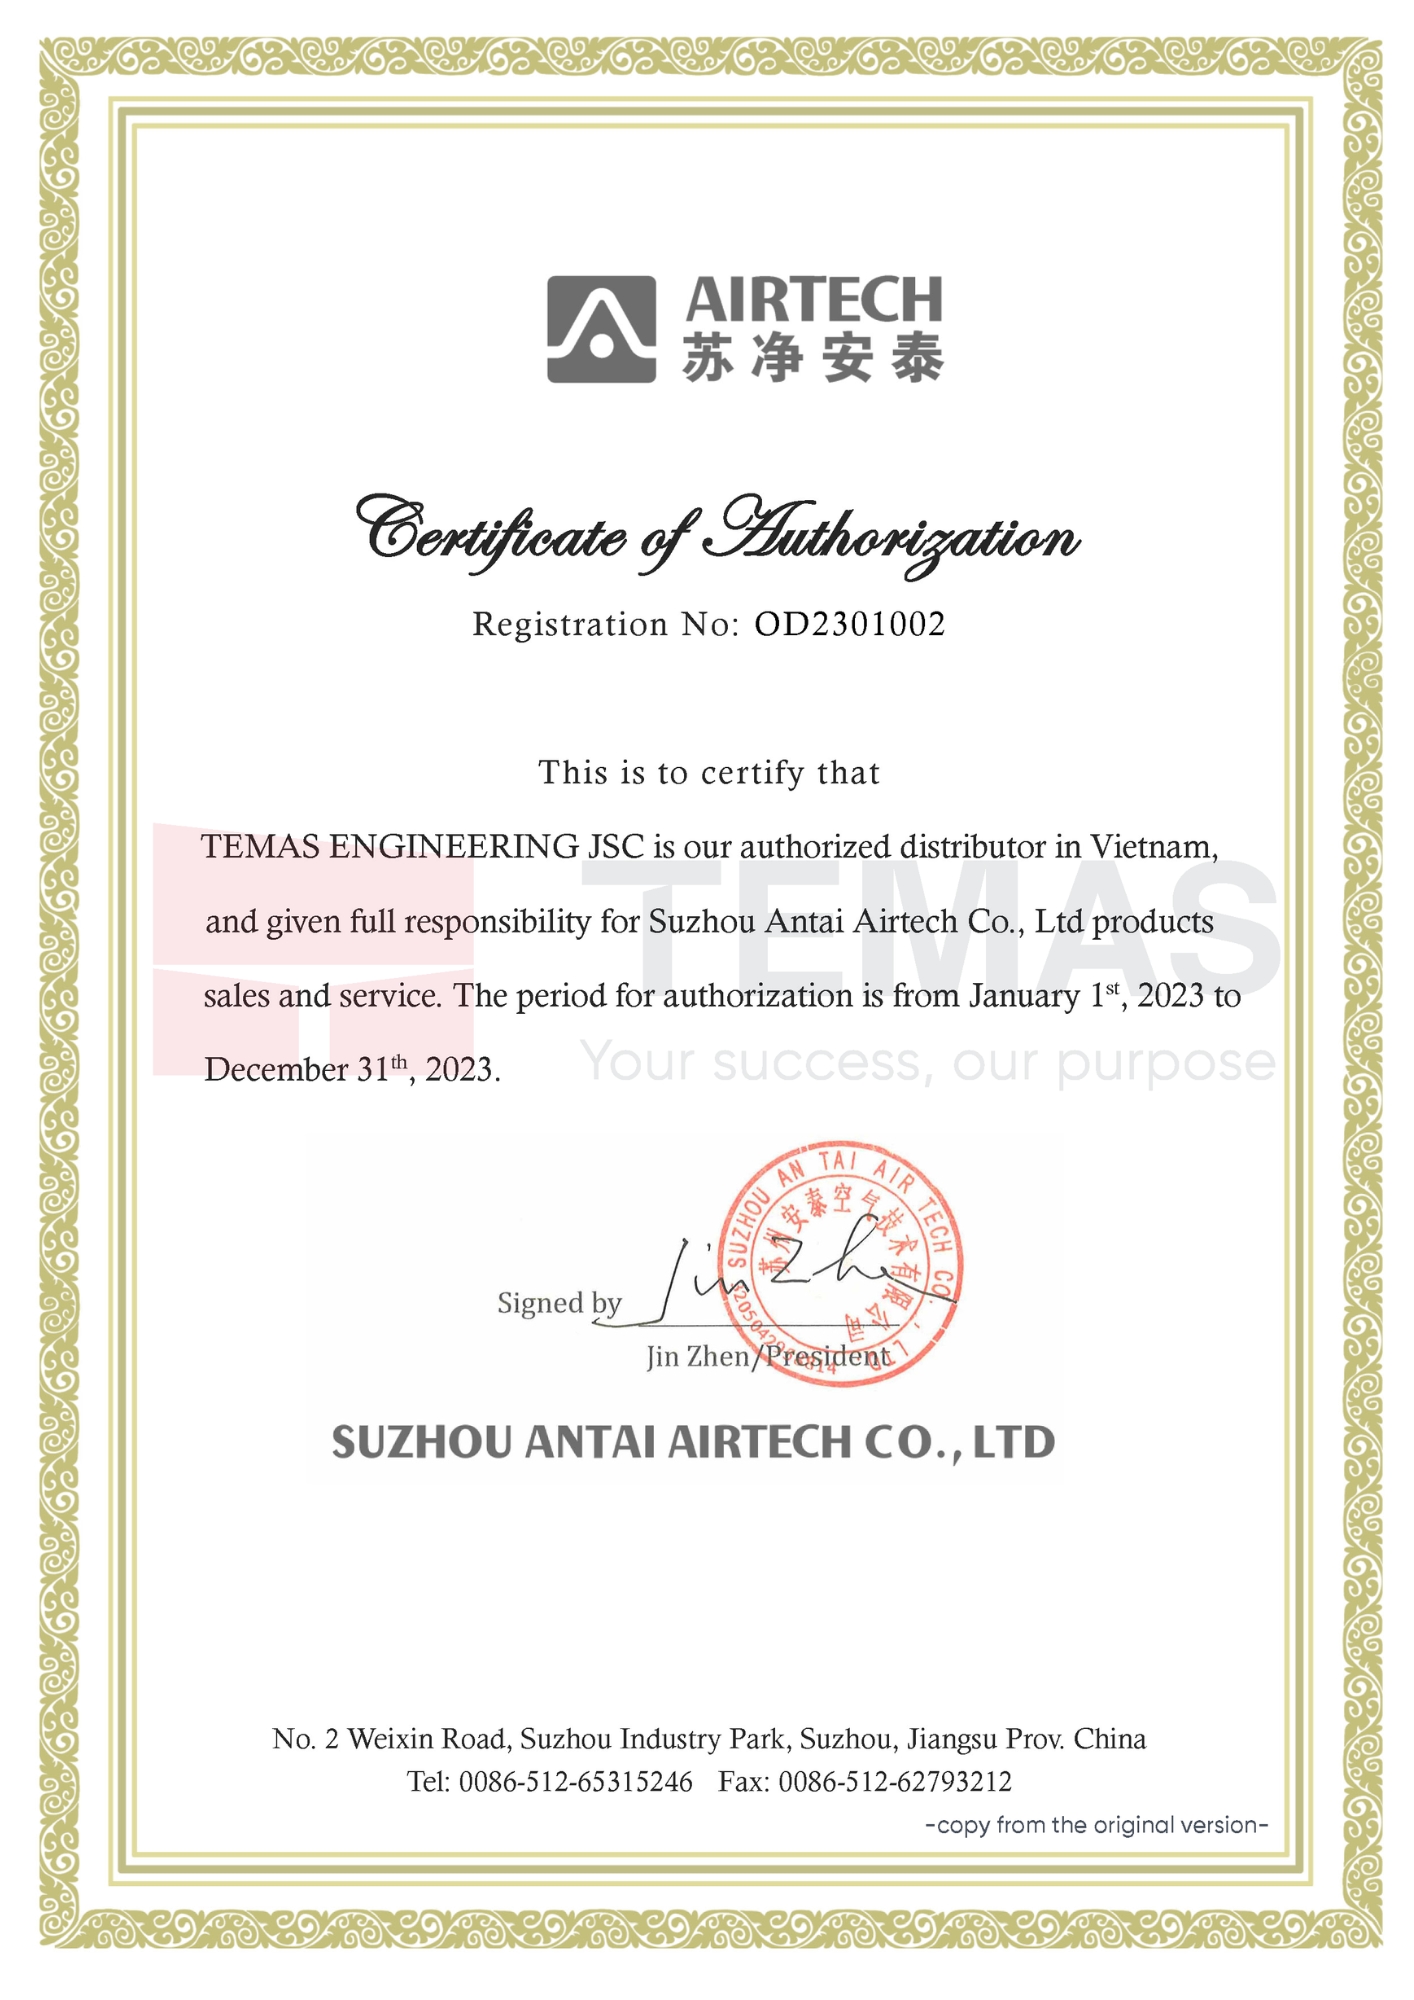 Airtech [/br] Certificate of Authorization